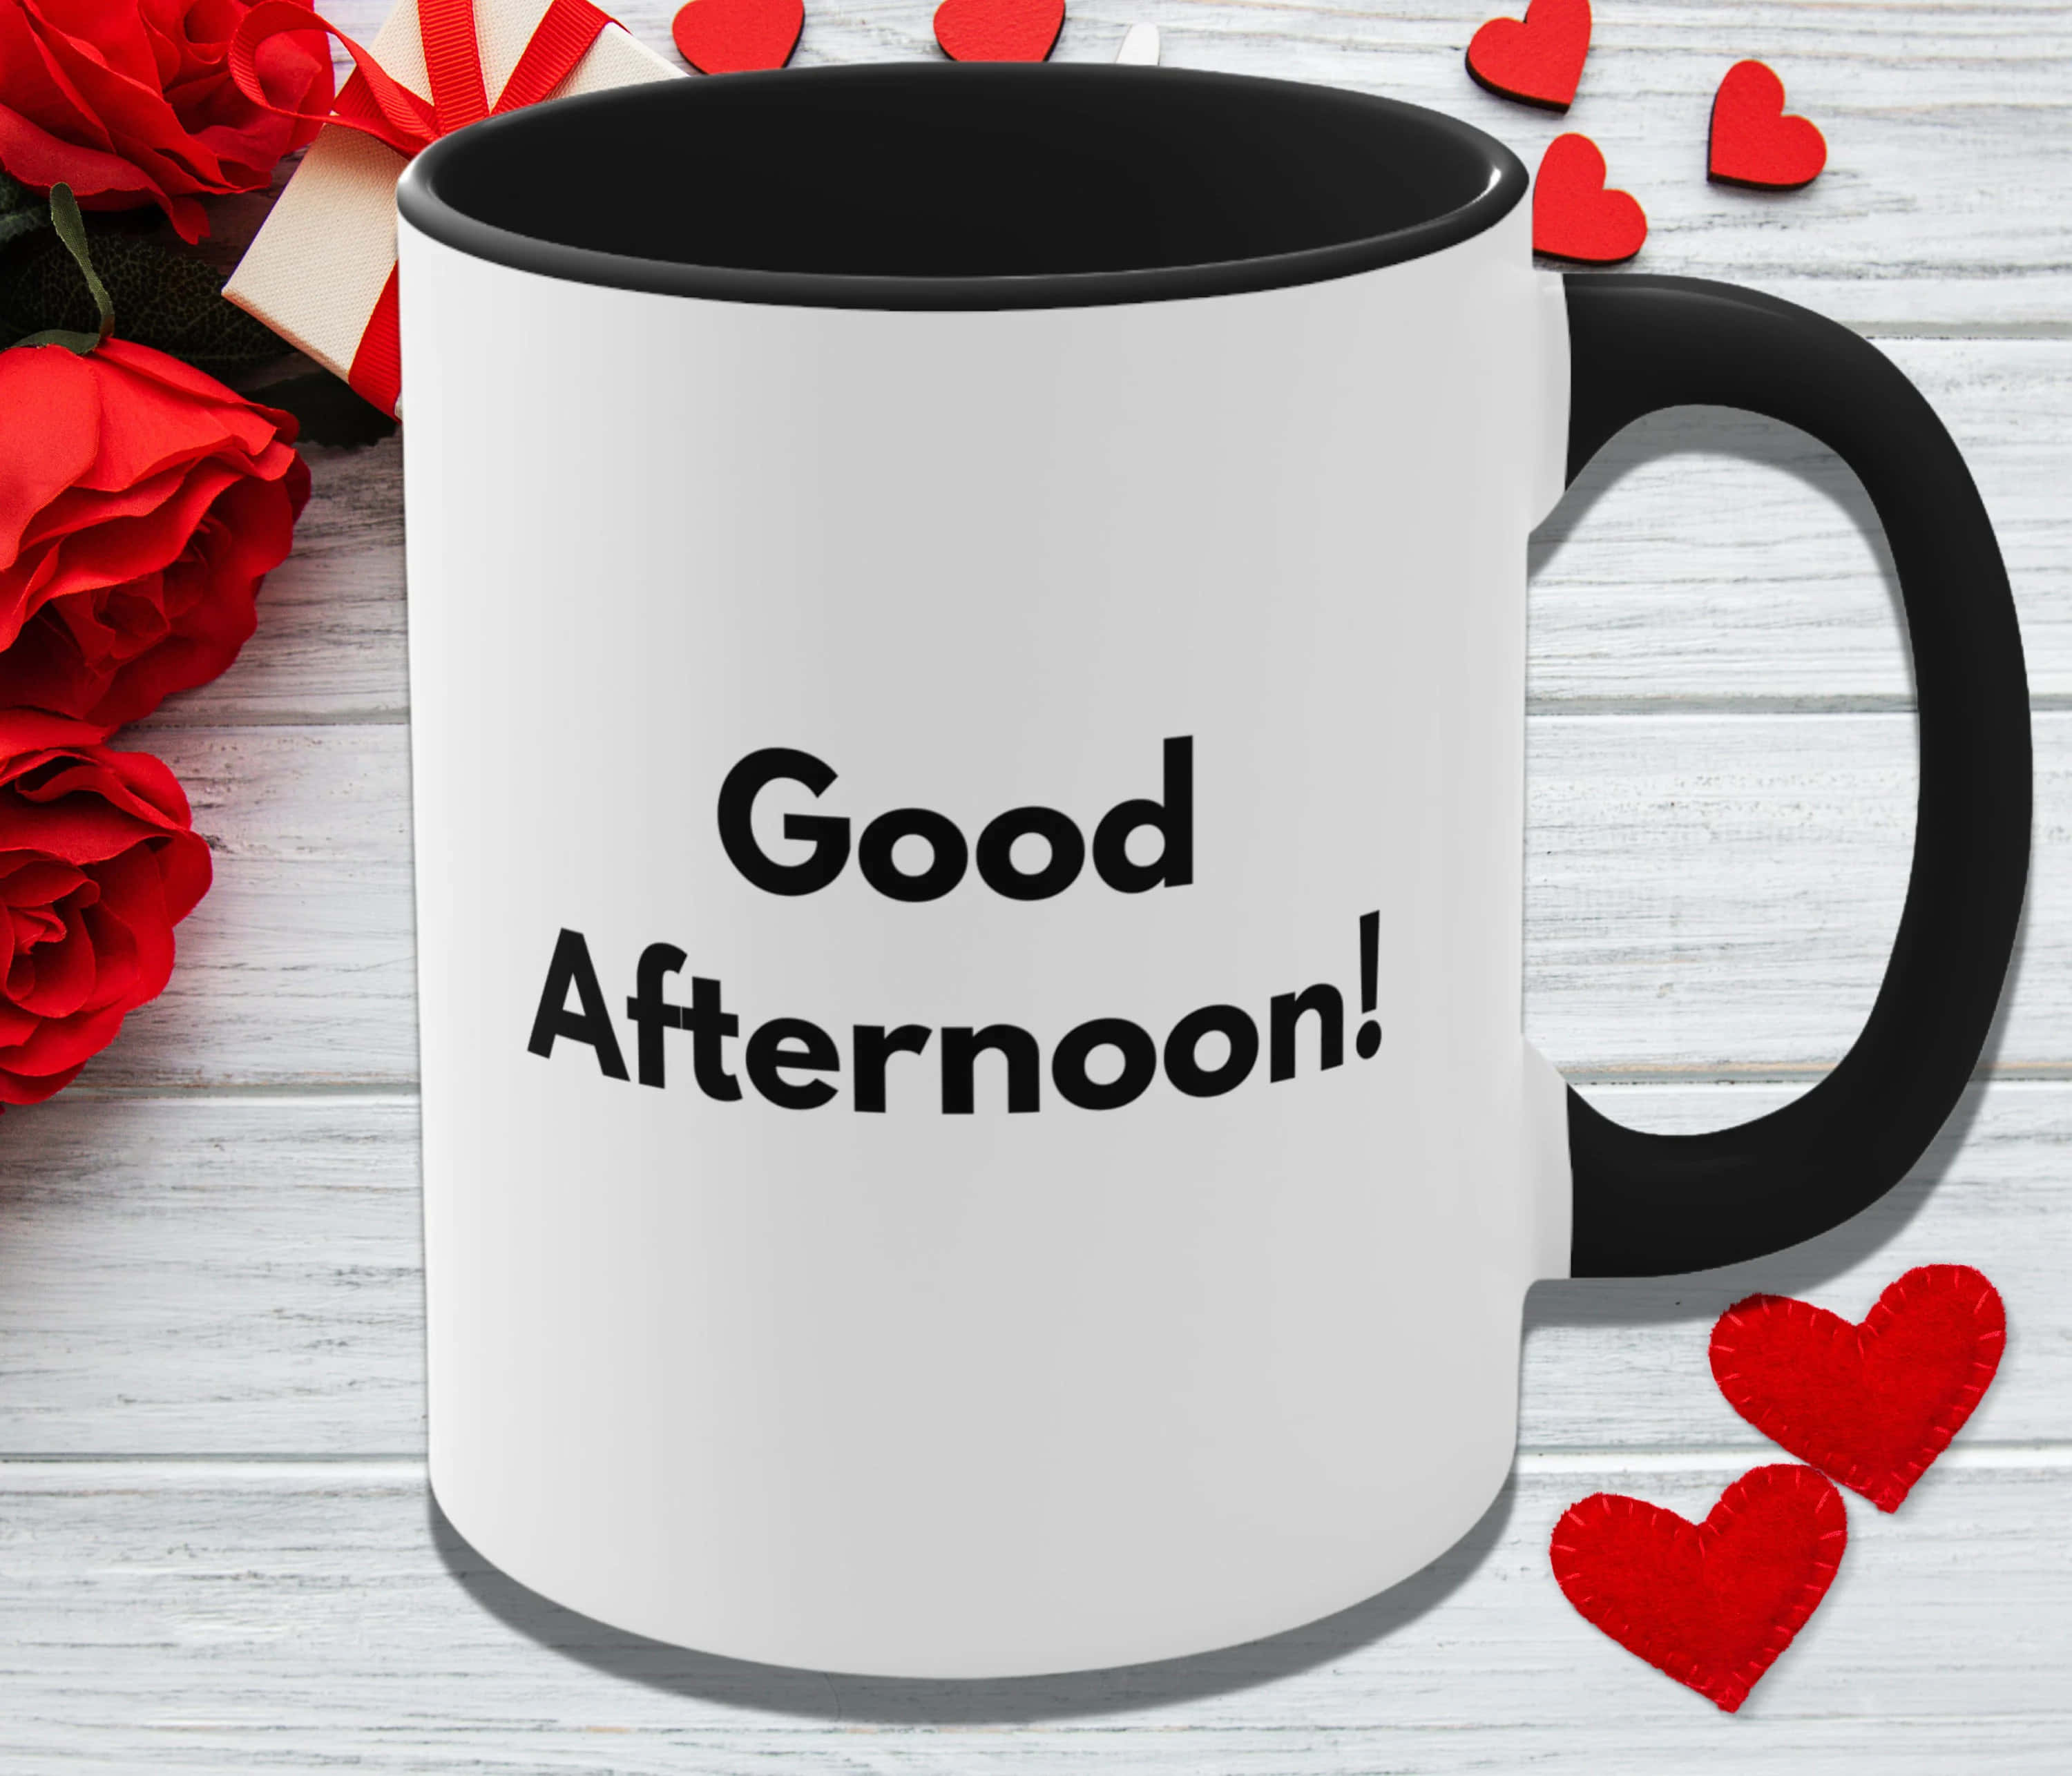 Download Good Afternoon Coffee Mug Valentines Day Picture | Wallpapers.com